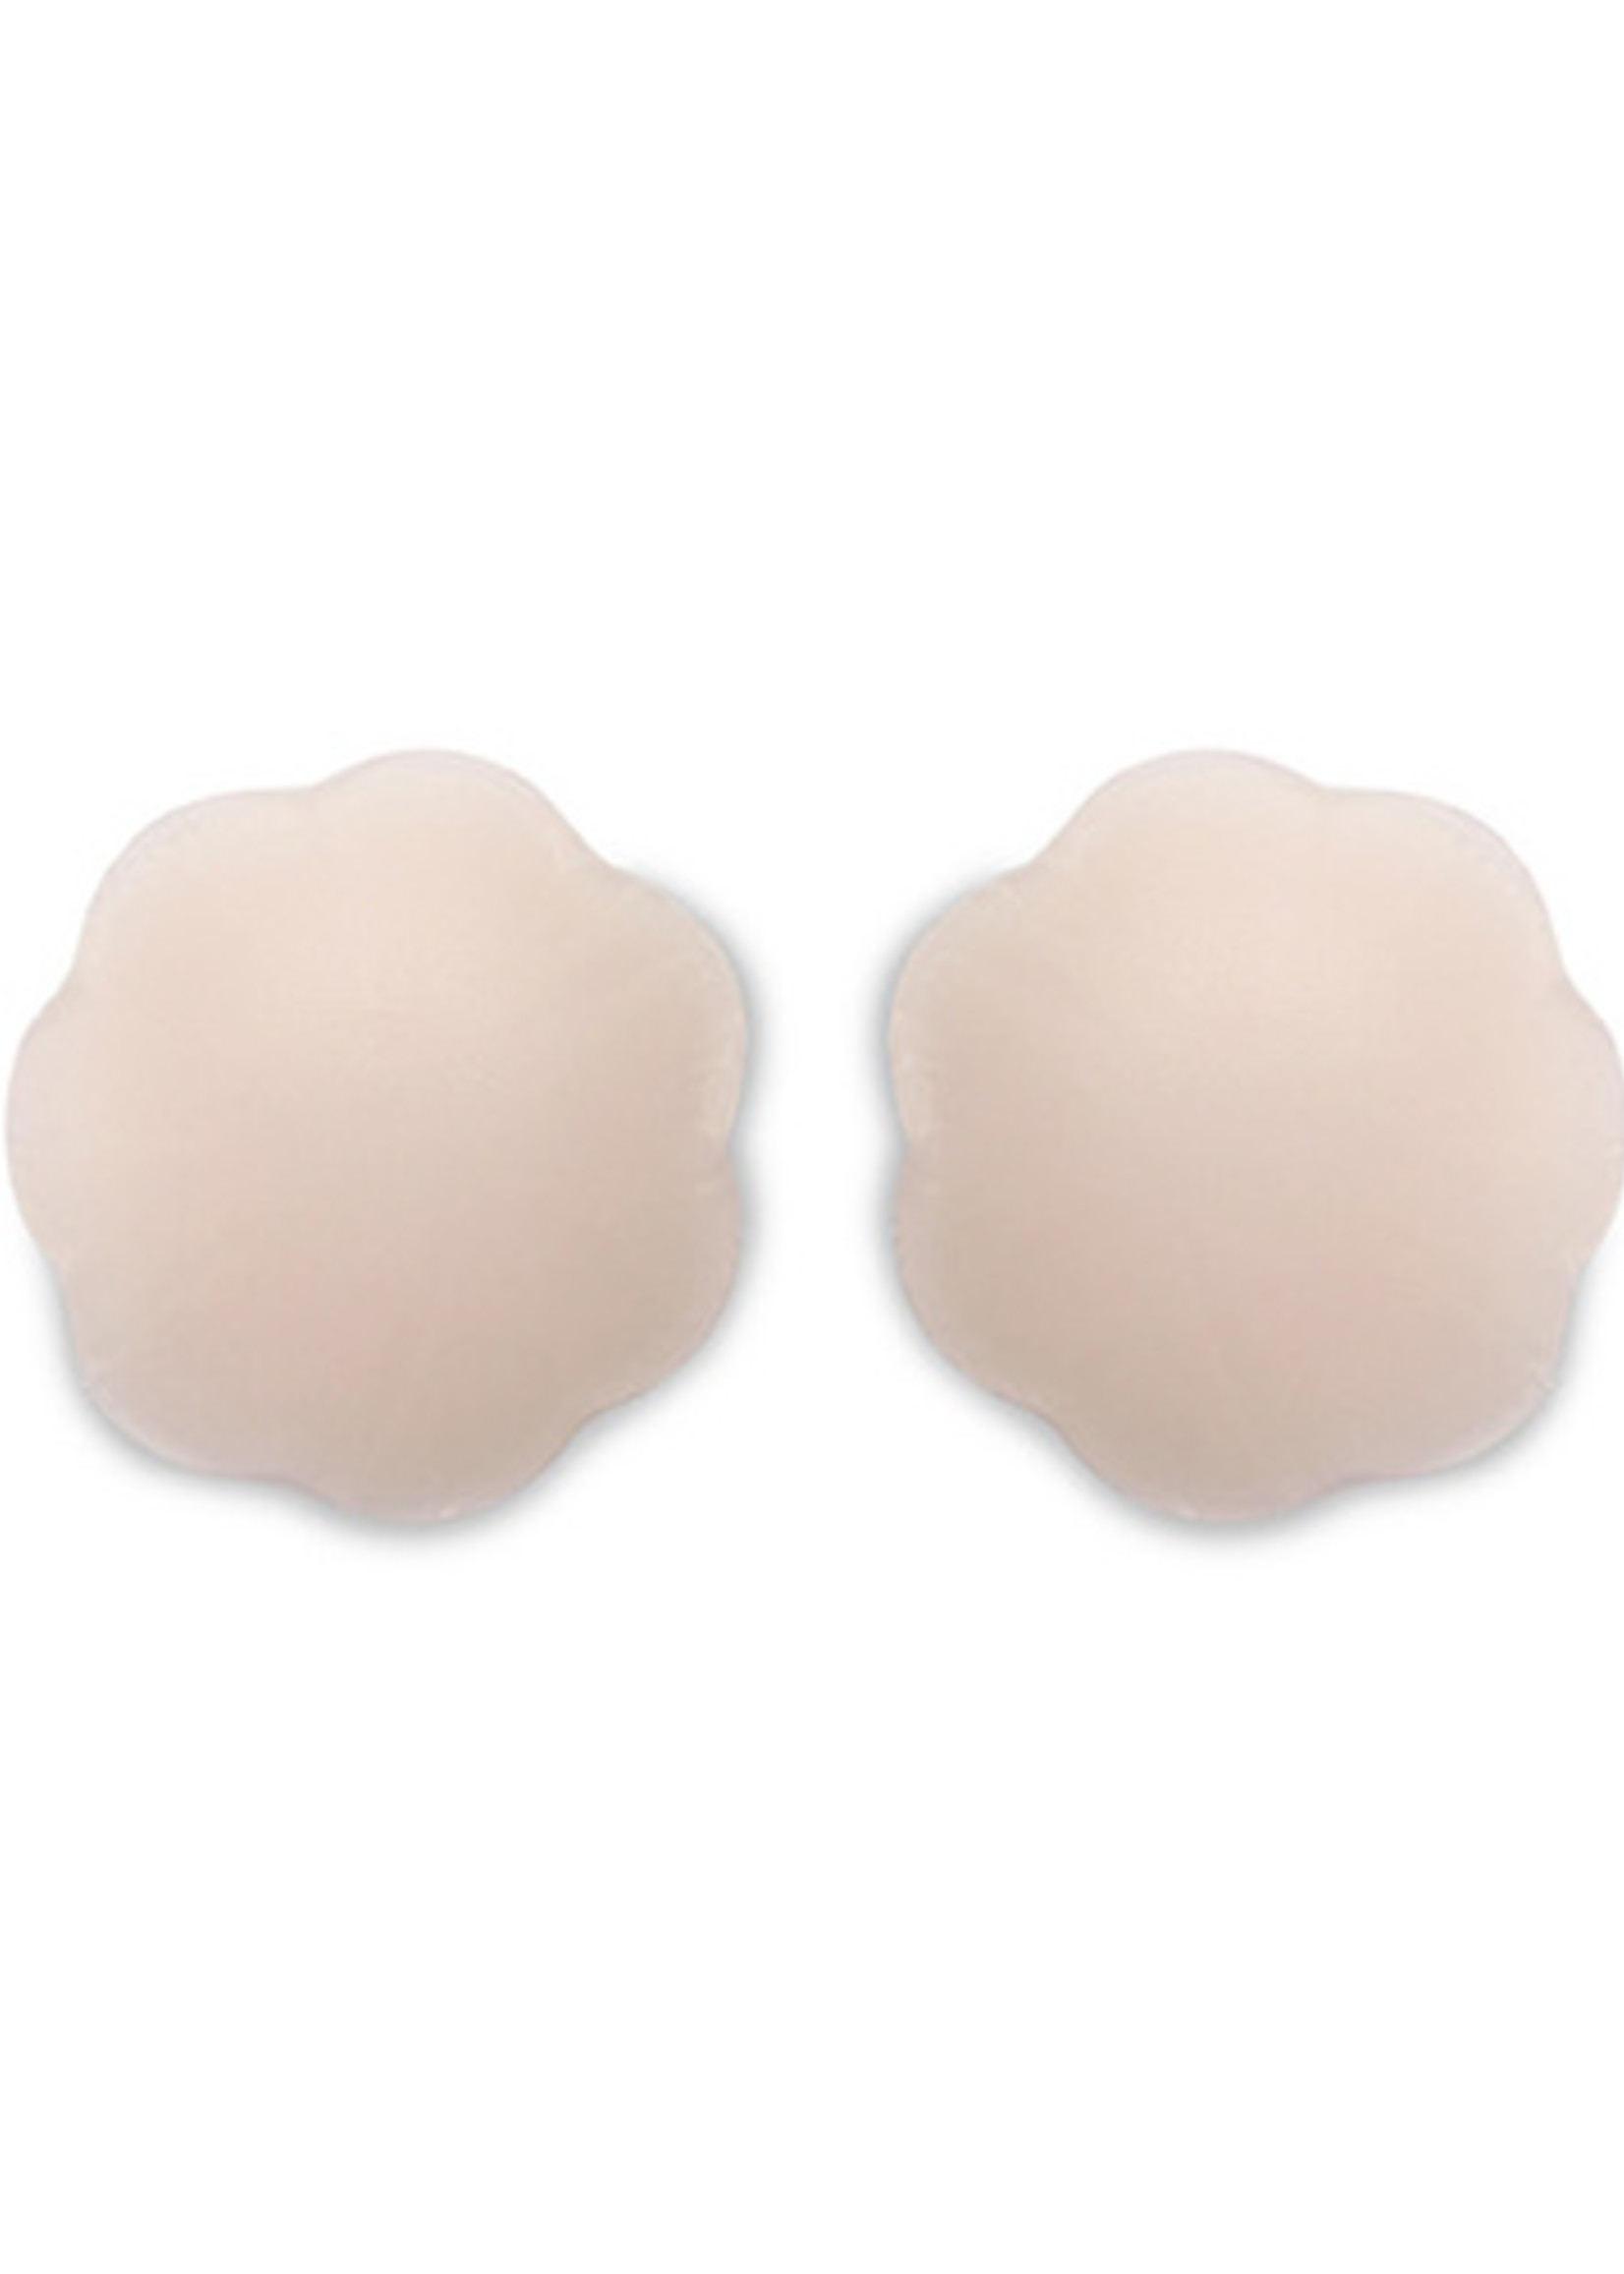 Forever New Adhesive Re-usable Silicone Nipple Covers